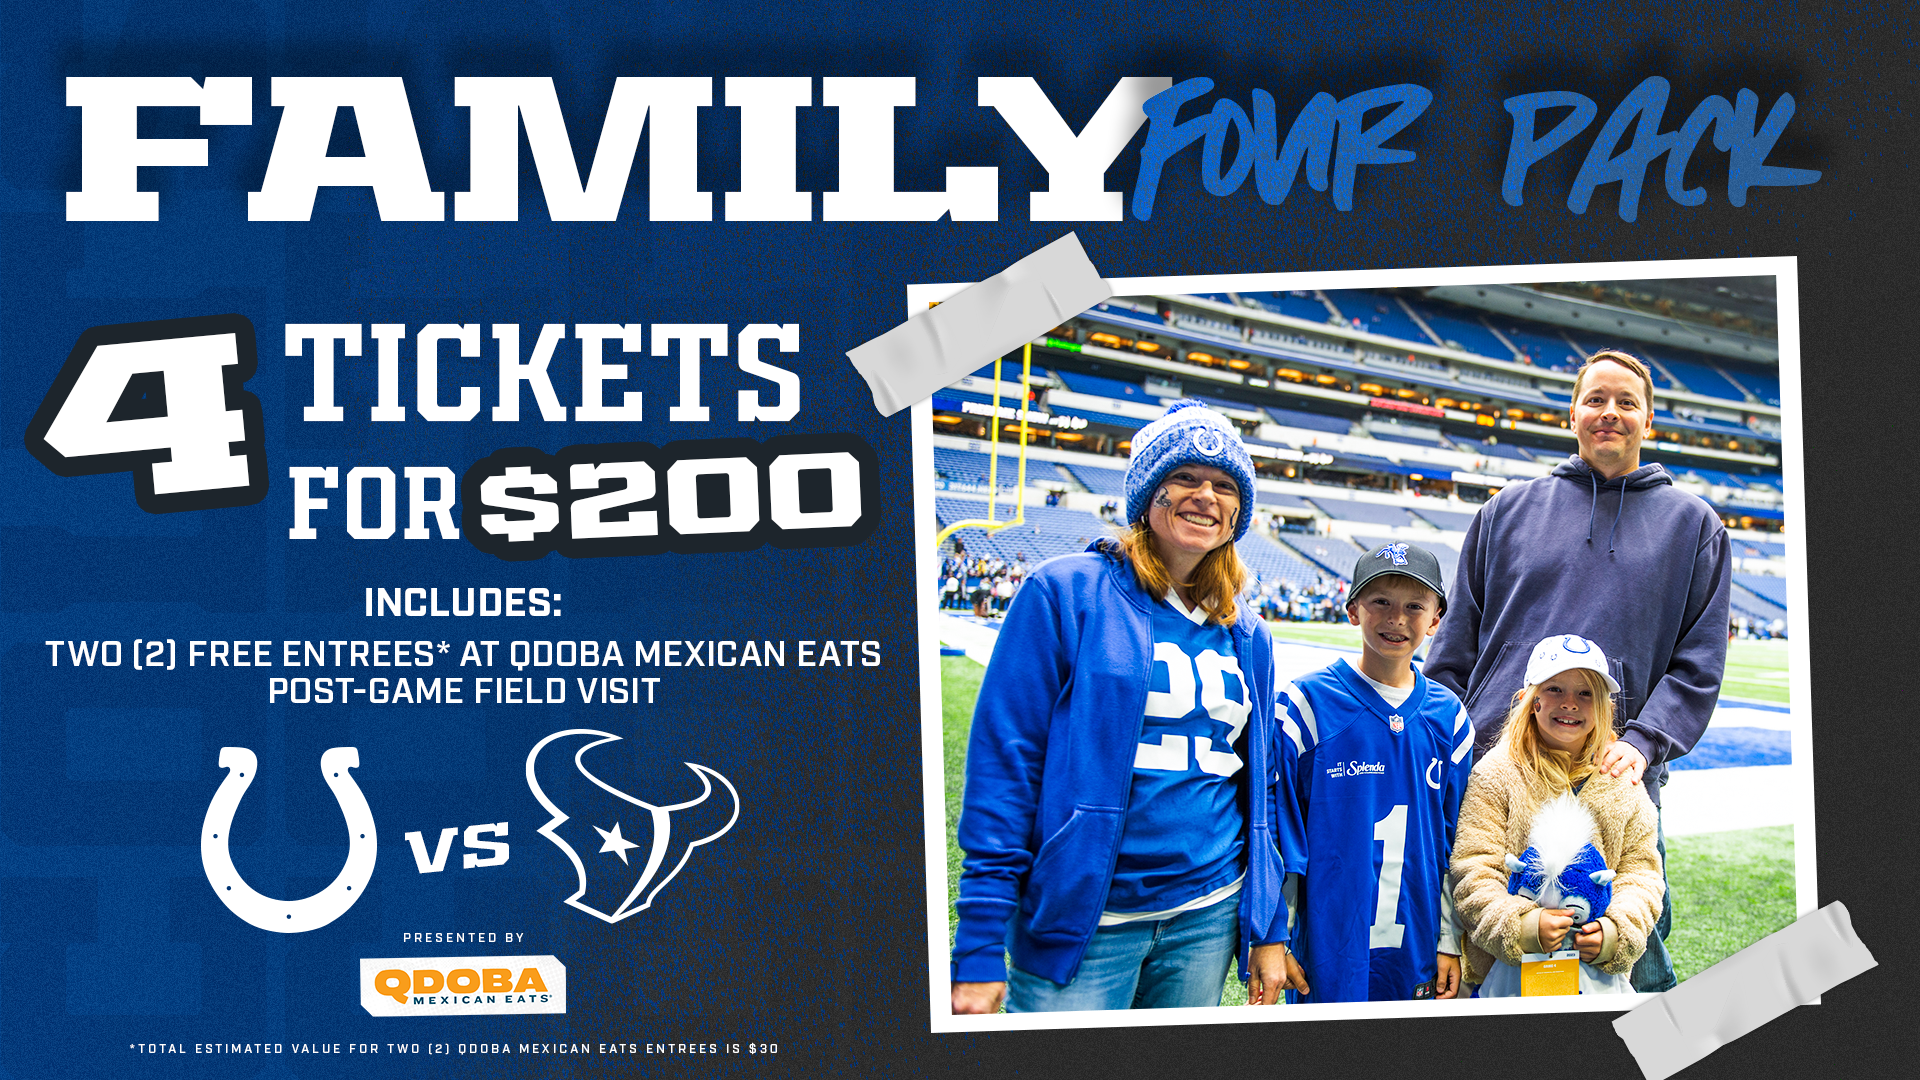 Colts Family Four Pack